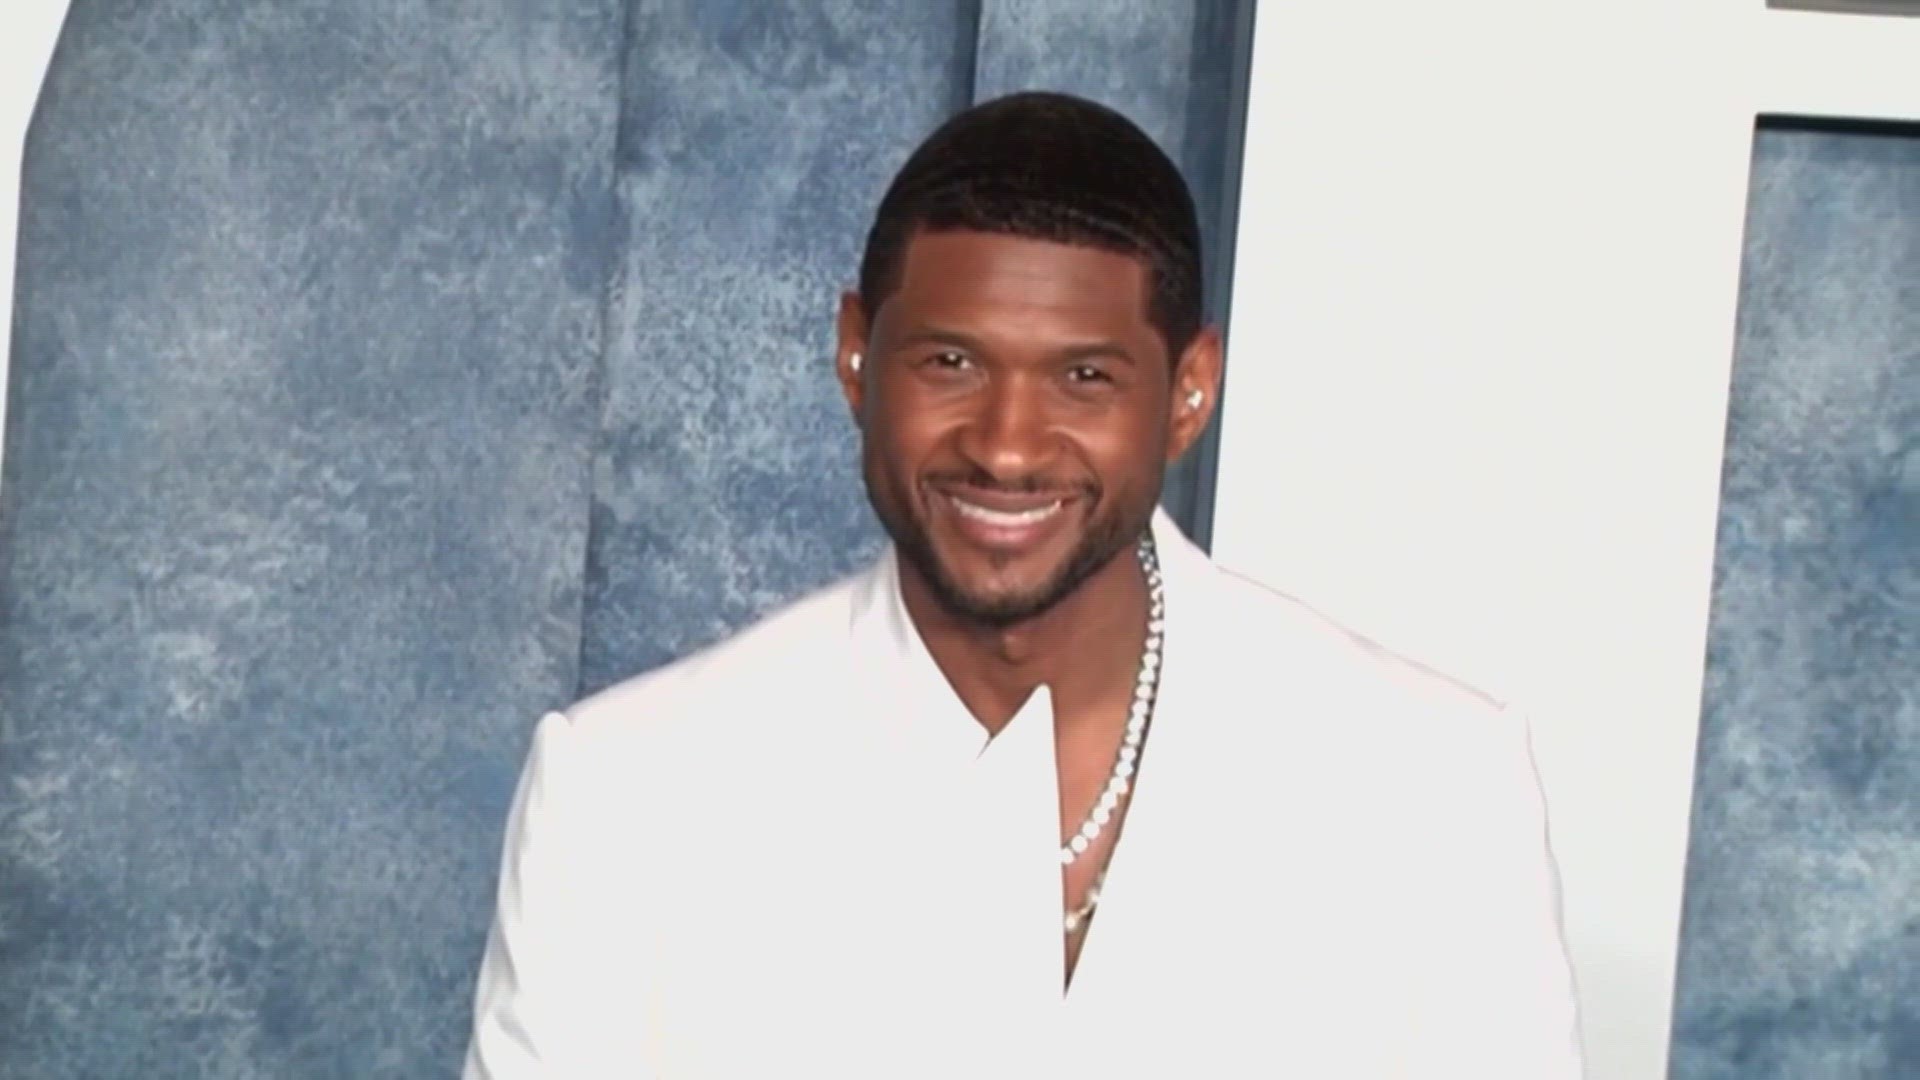 Usher's Past Present Future tour kicks off in DC later this summer.